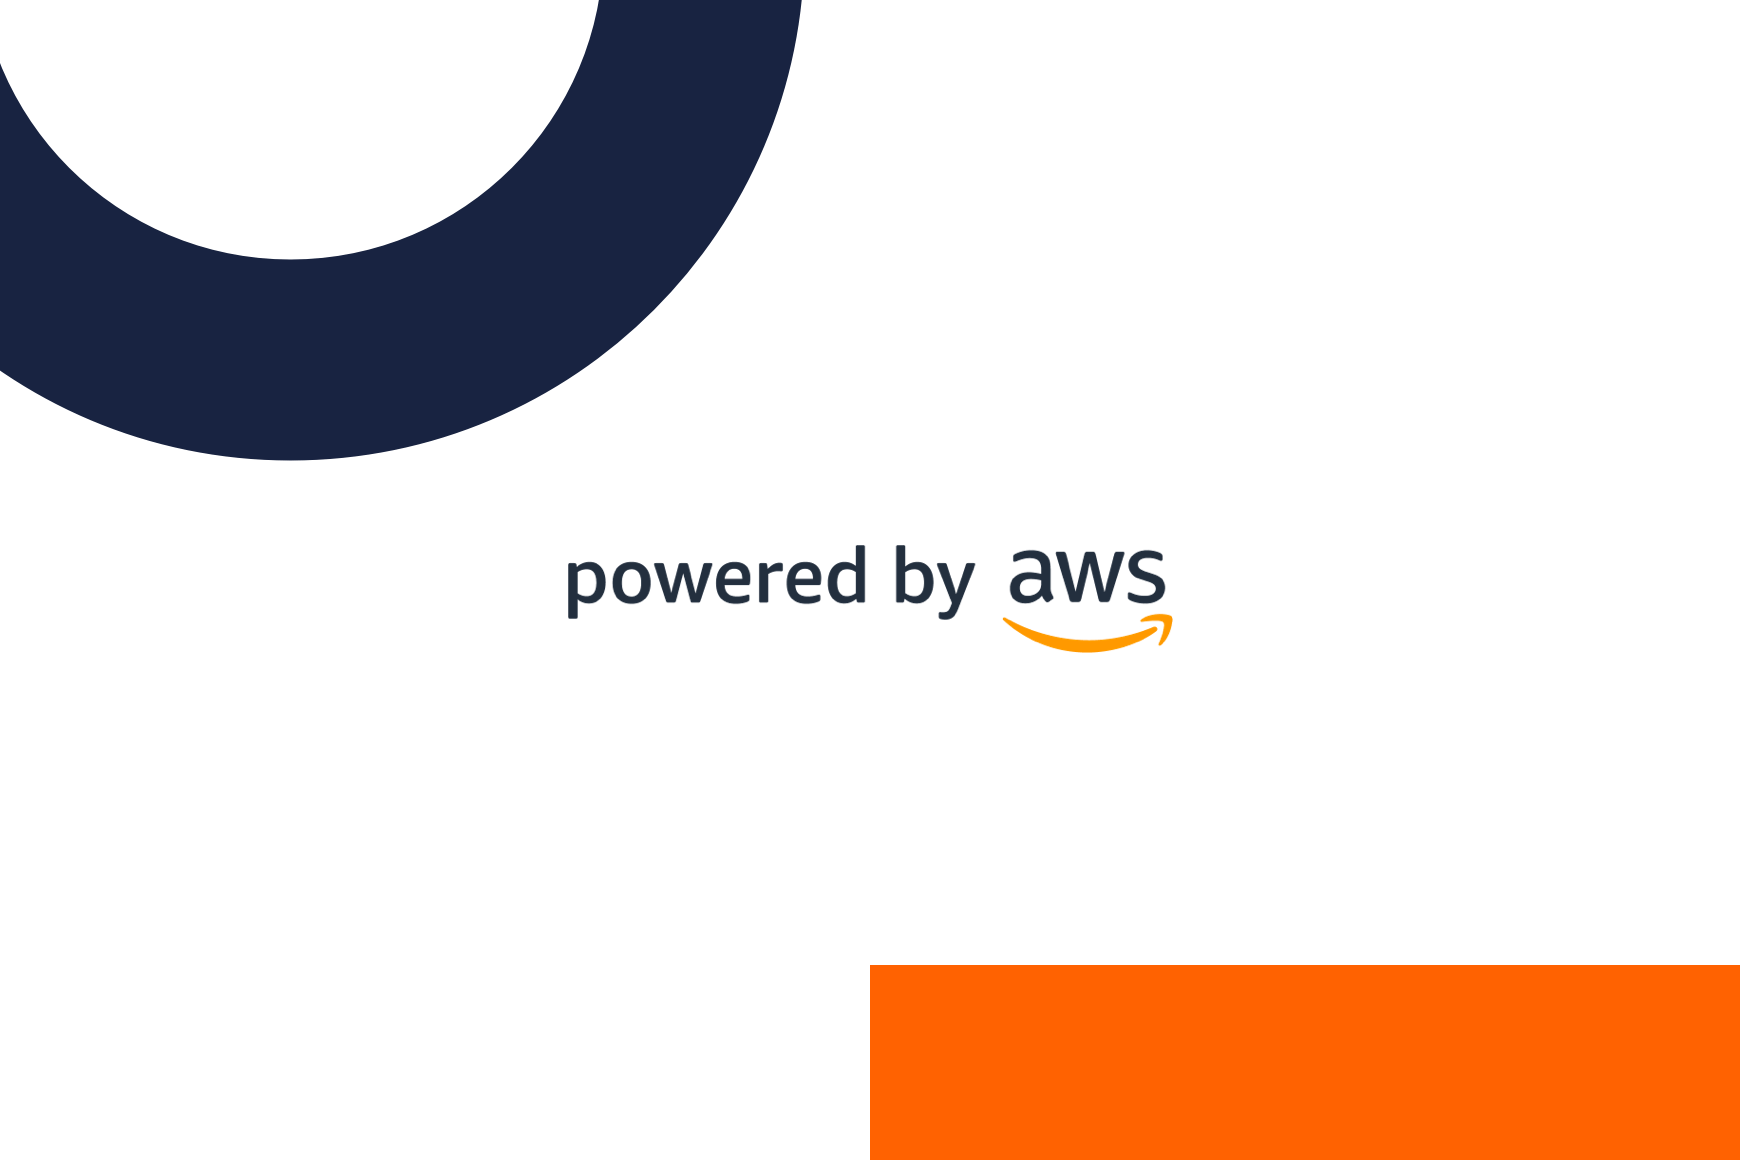 Powered by AWS